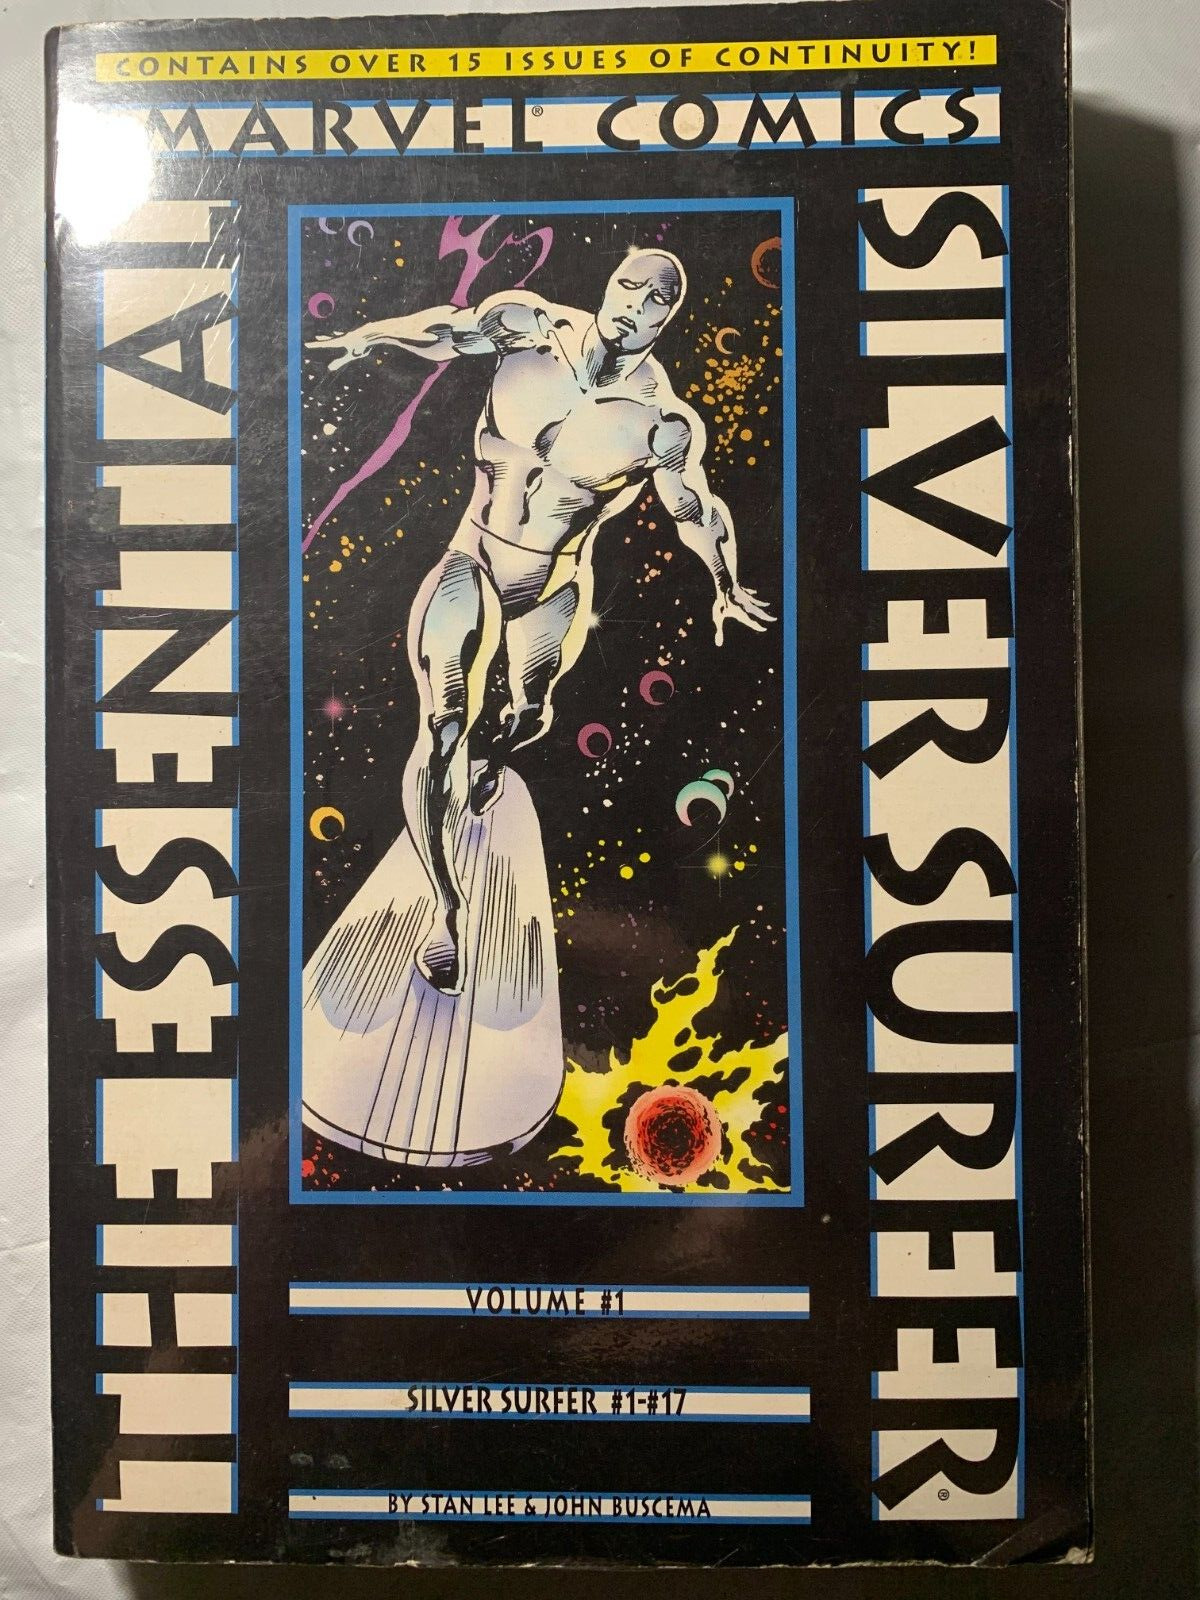 The Essential Silver Surfer Vol #1 Marvel HUGE BOOK - FIRST PRINTING